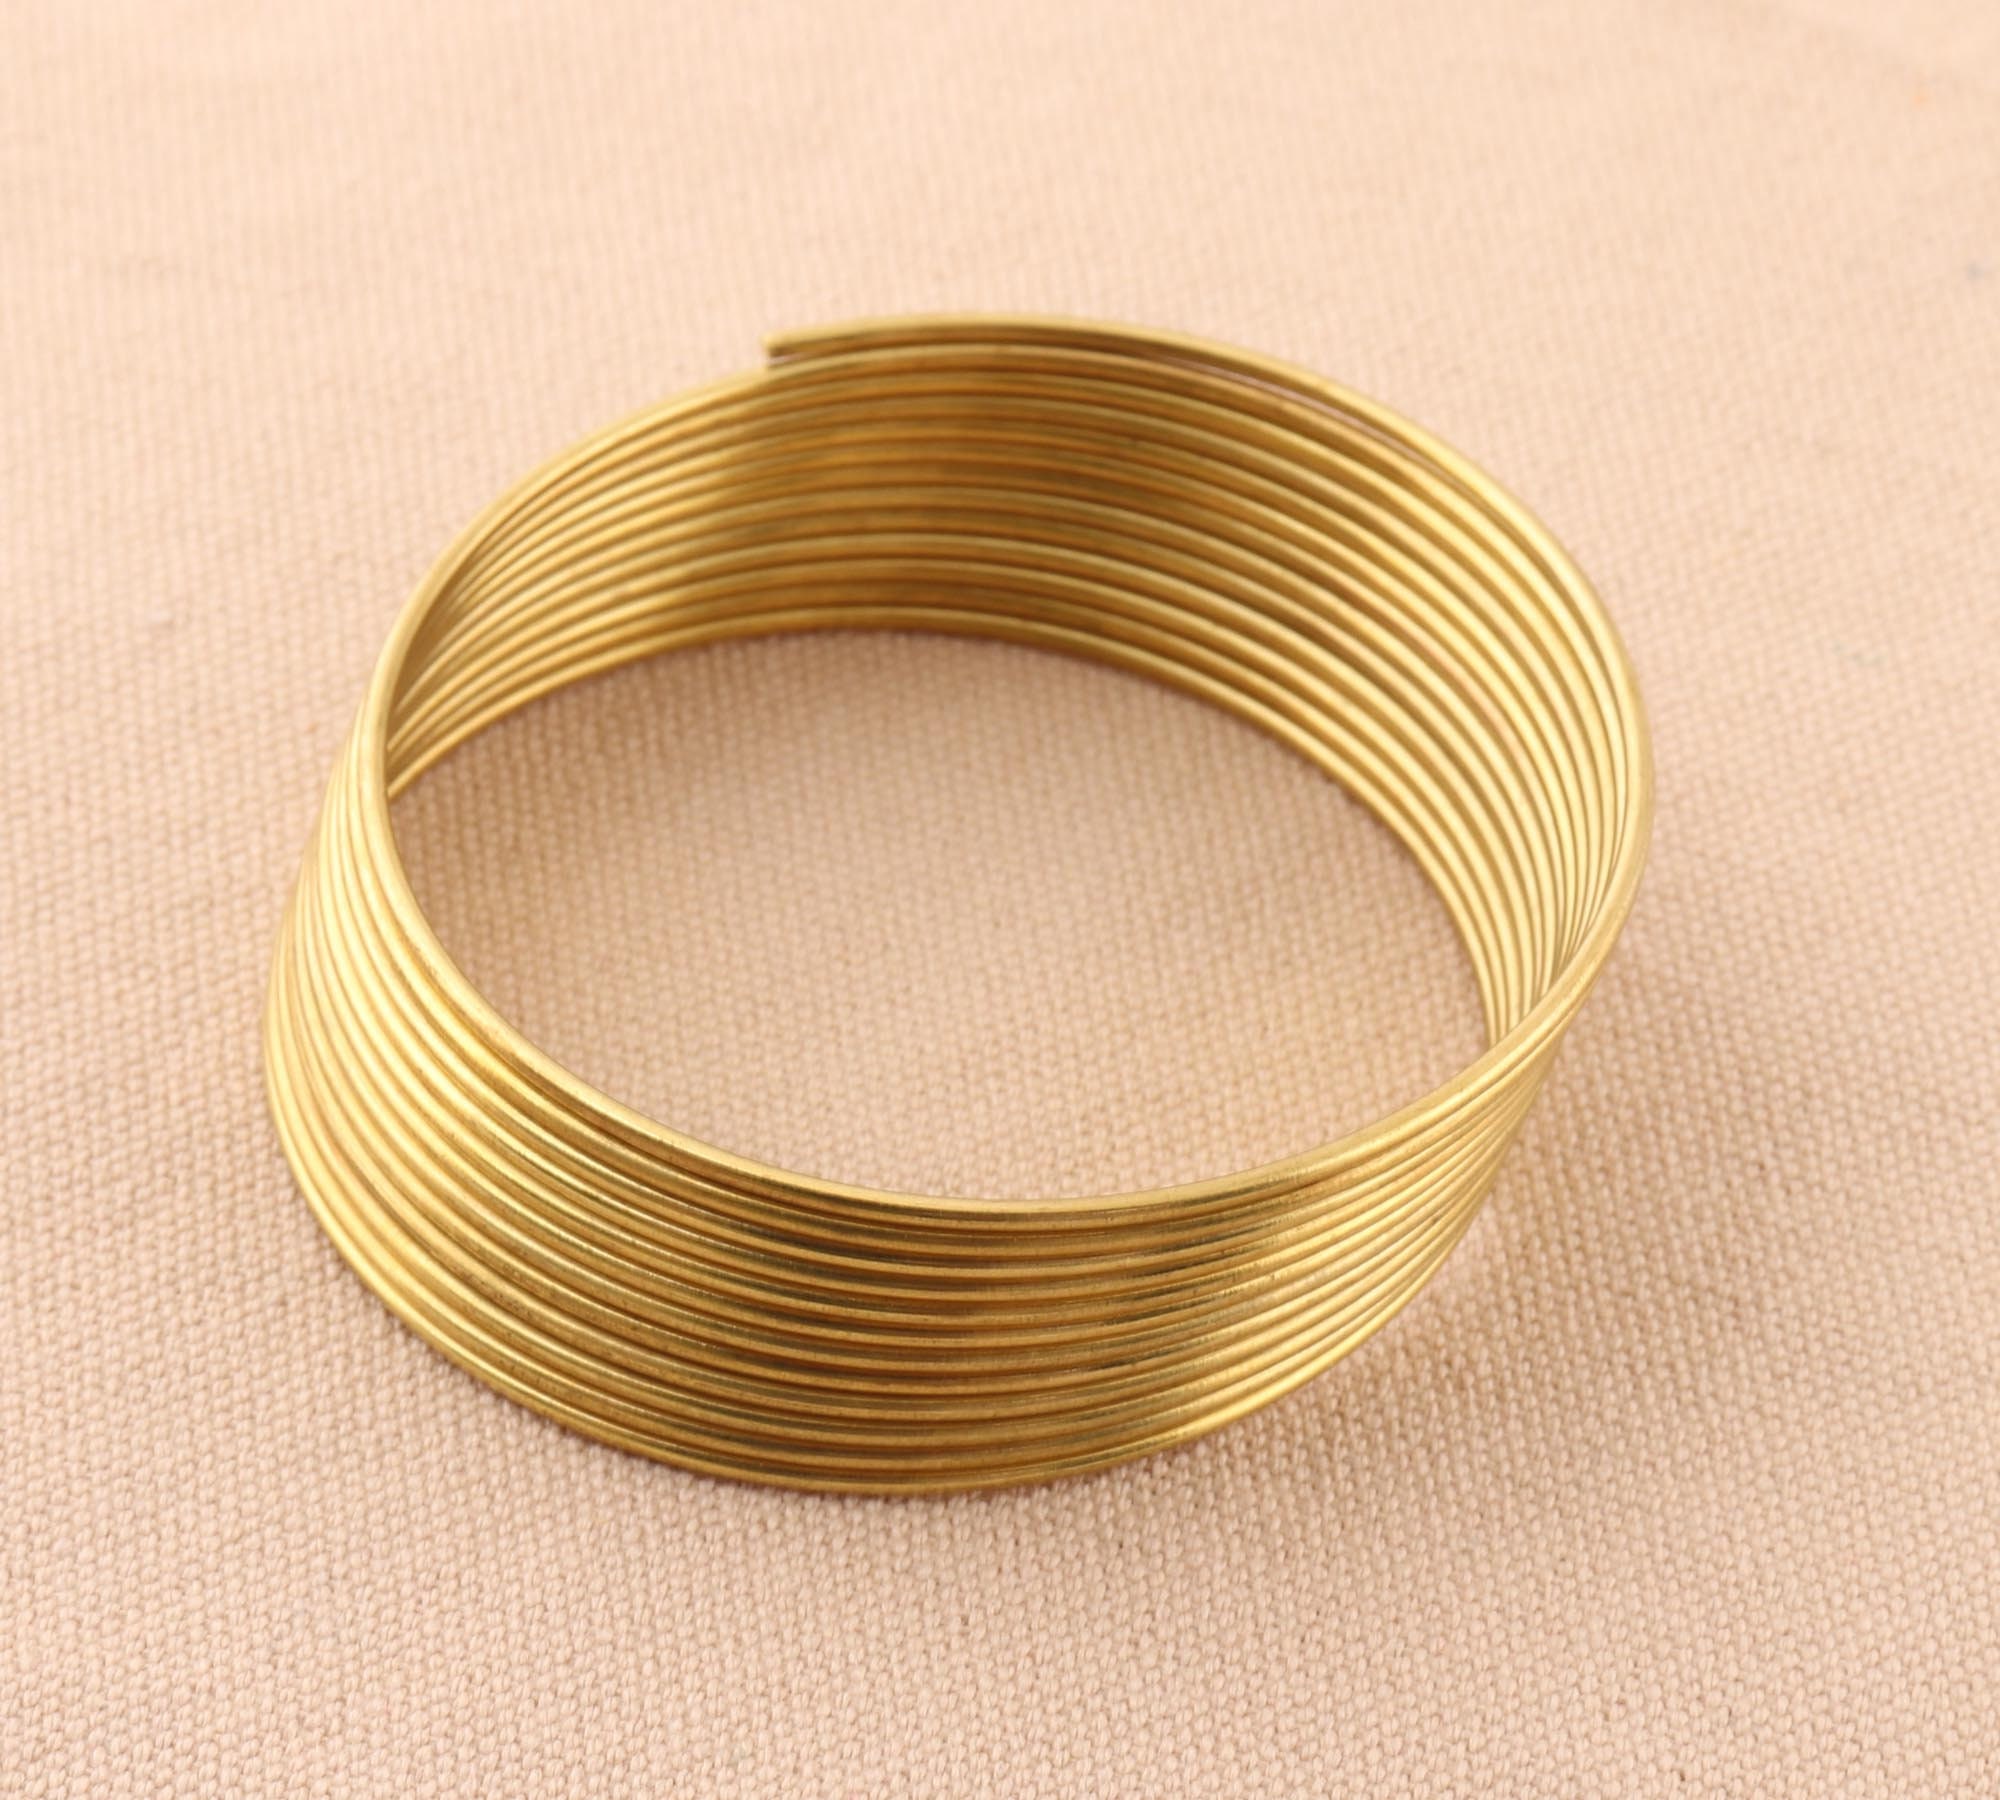 Small Beads Square Shape Tiny Beads 2mm Gold Beads For Necklace,Bracelet  100pcs